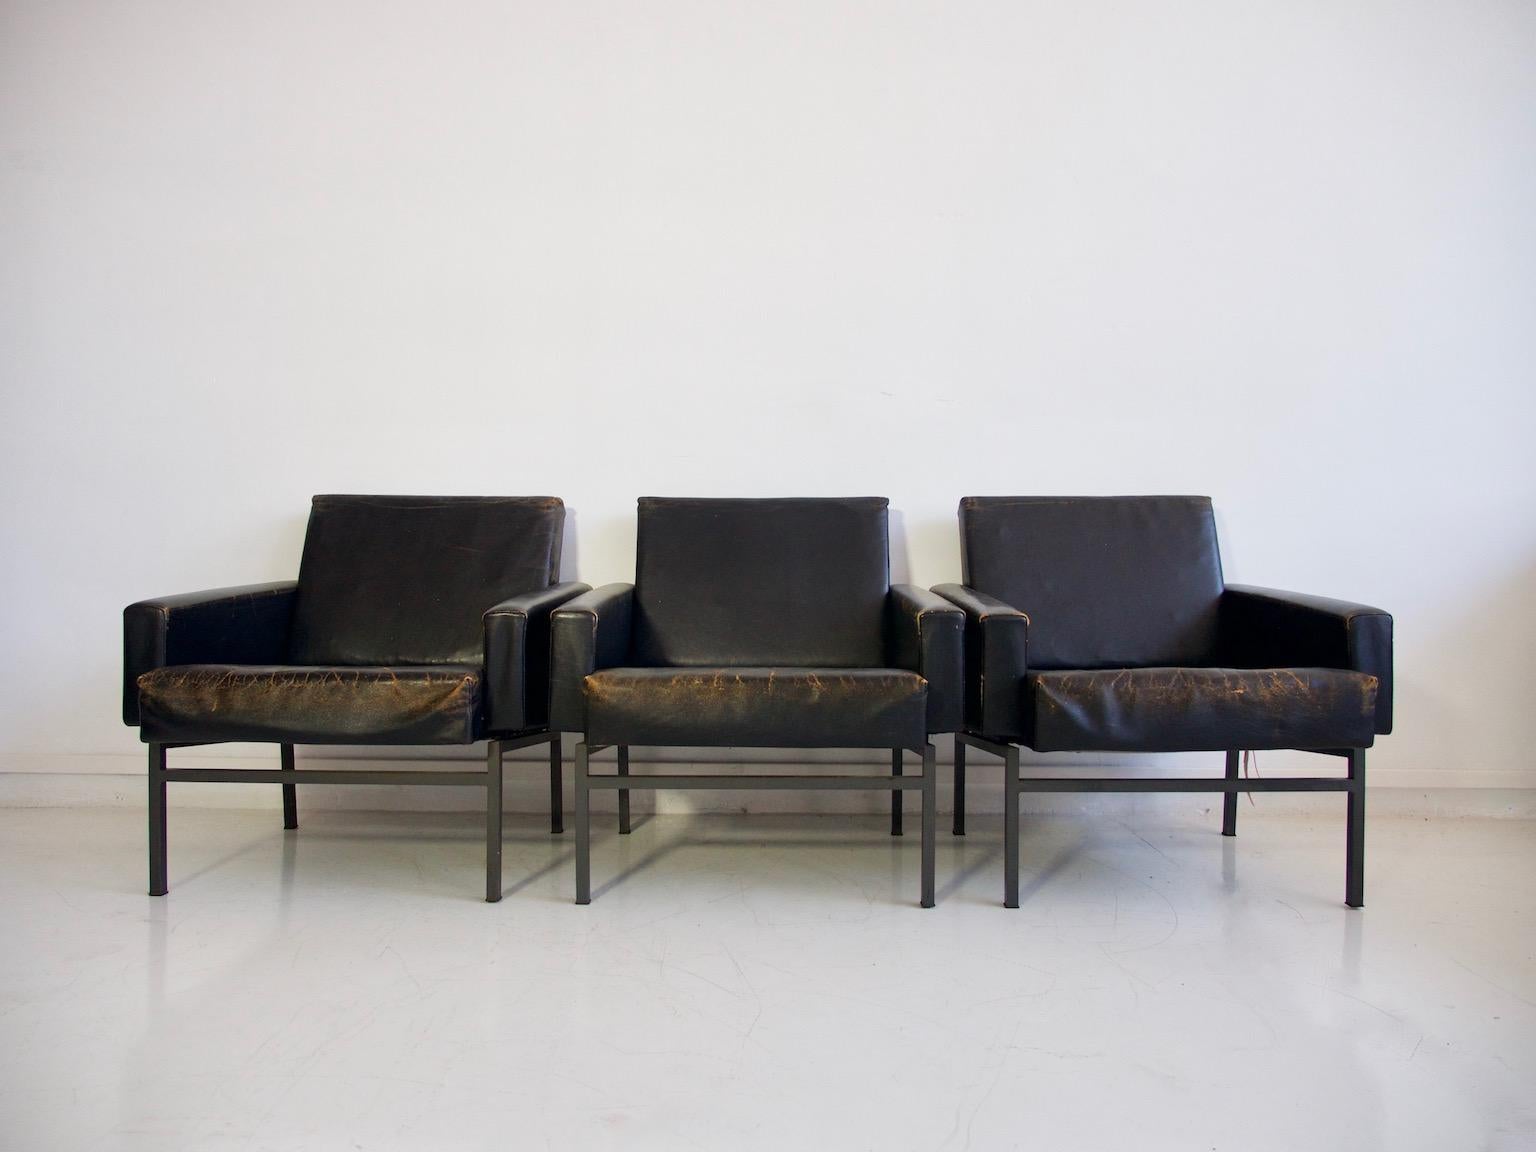 Three armchairs by Friedrich Wilhelm Moller for COR, model 'Conseta', 1970s. Original black leather with true aged patina and metal body with steel base. Frame lacquered in gray color. In the style of Arne Jacobsen's 'Airport Chair'.